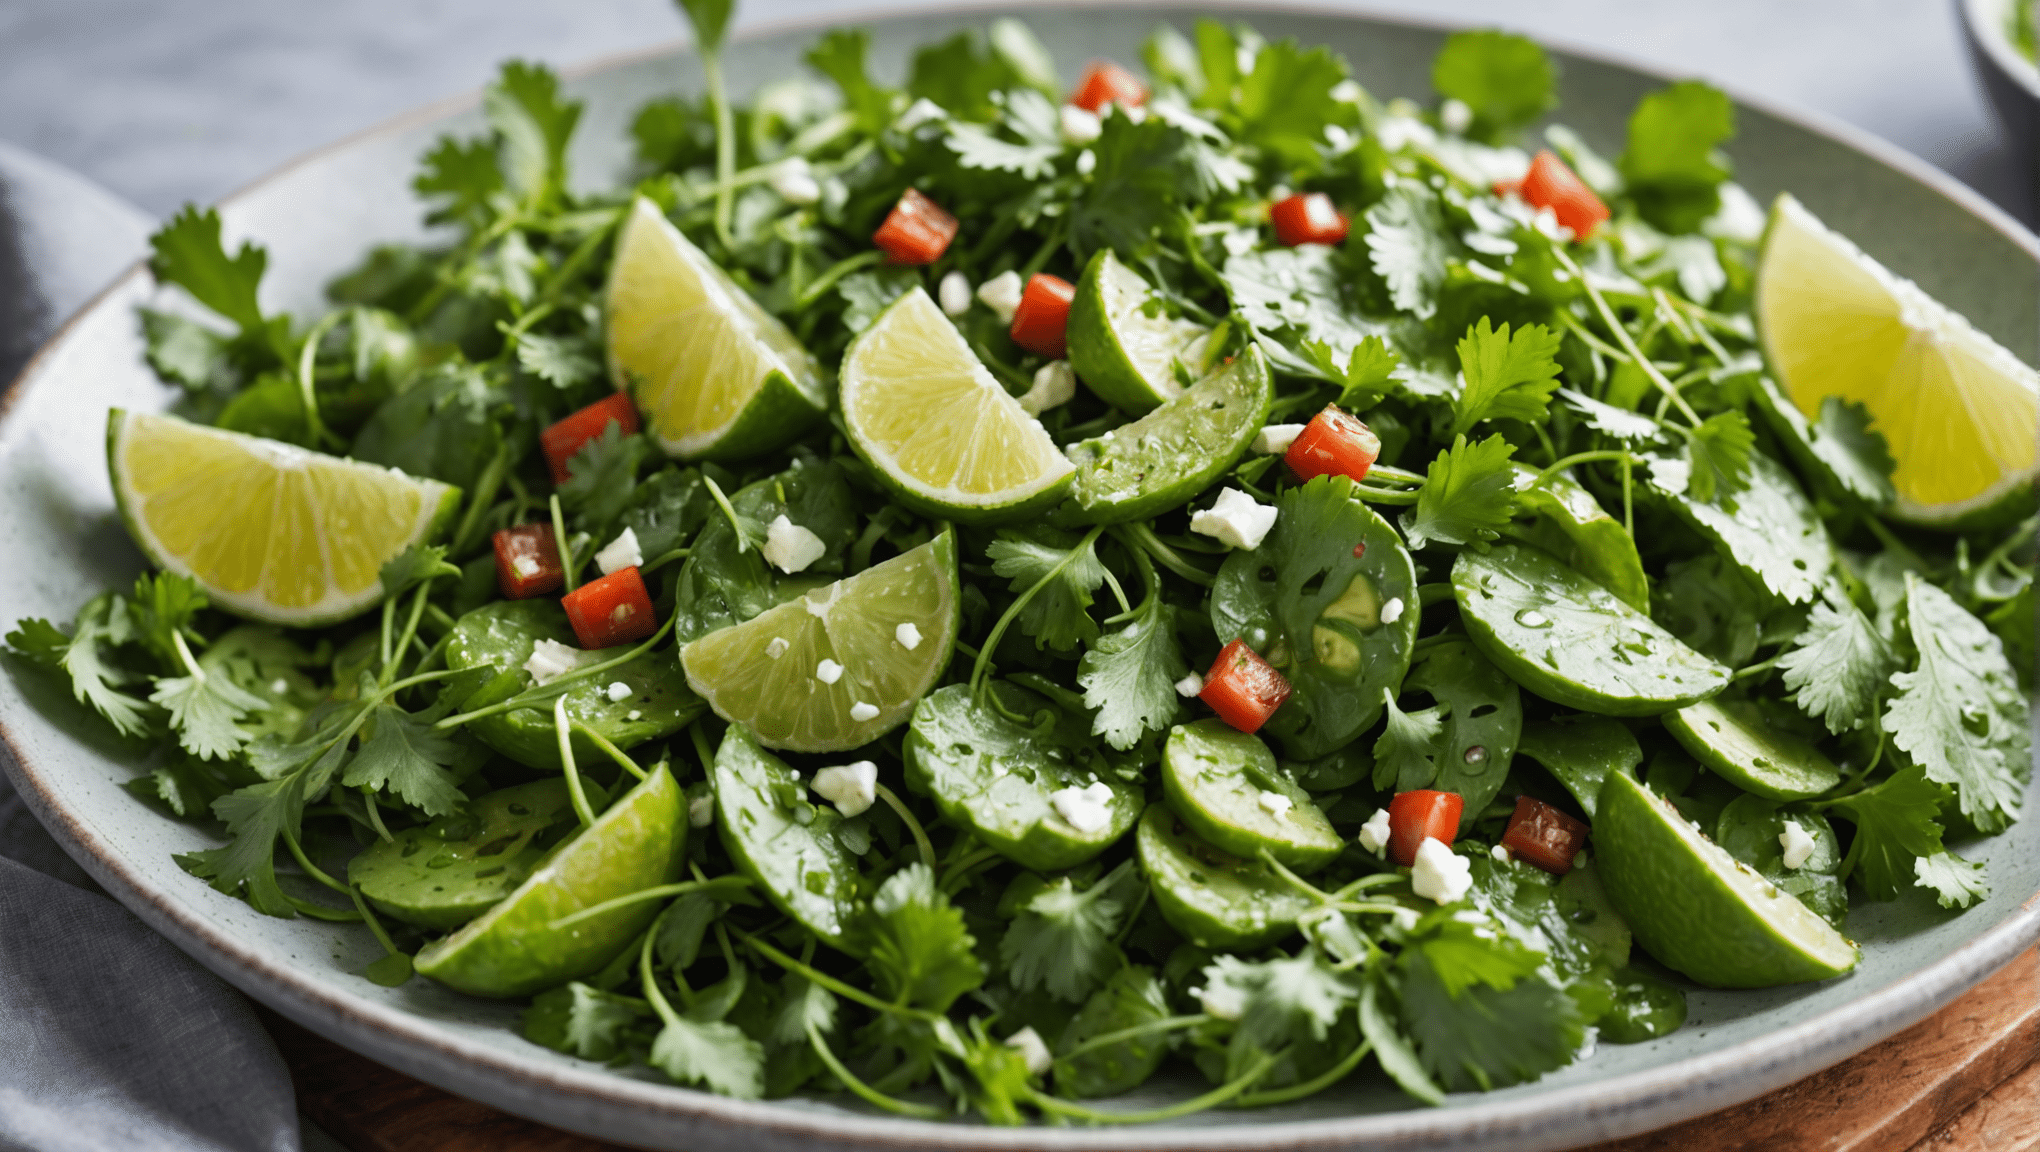 Nopales Salad with Lime and Cilantro Dressing